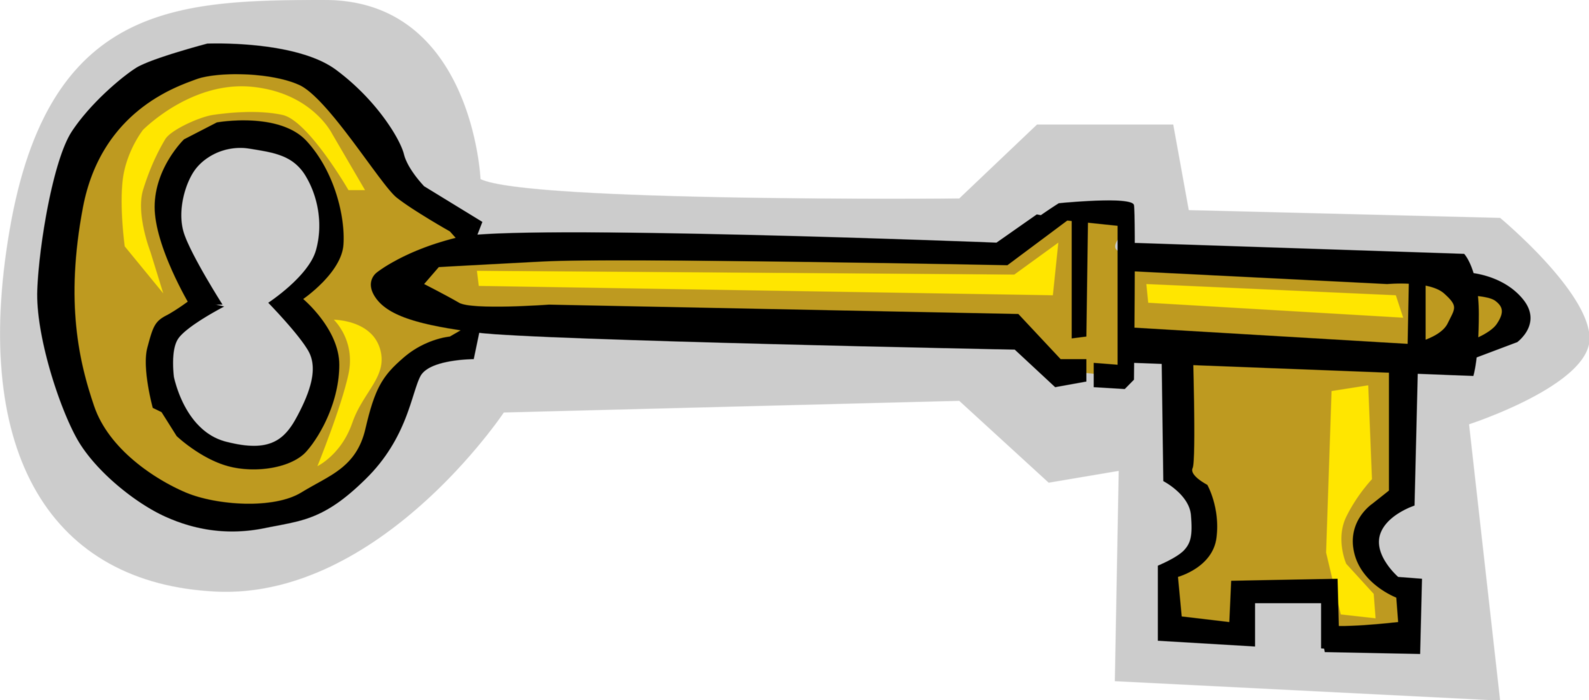 Vector Illustration of Small Metal Instrument Key Cut to Fit into Padlock Lock